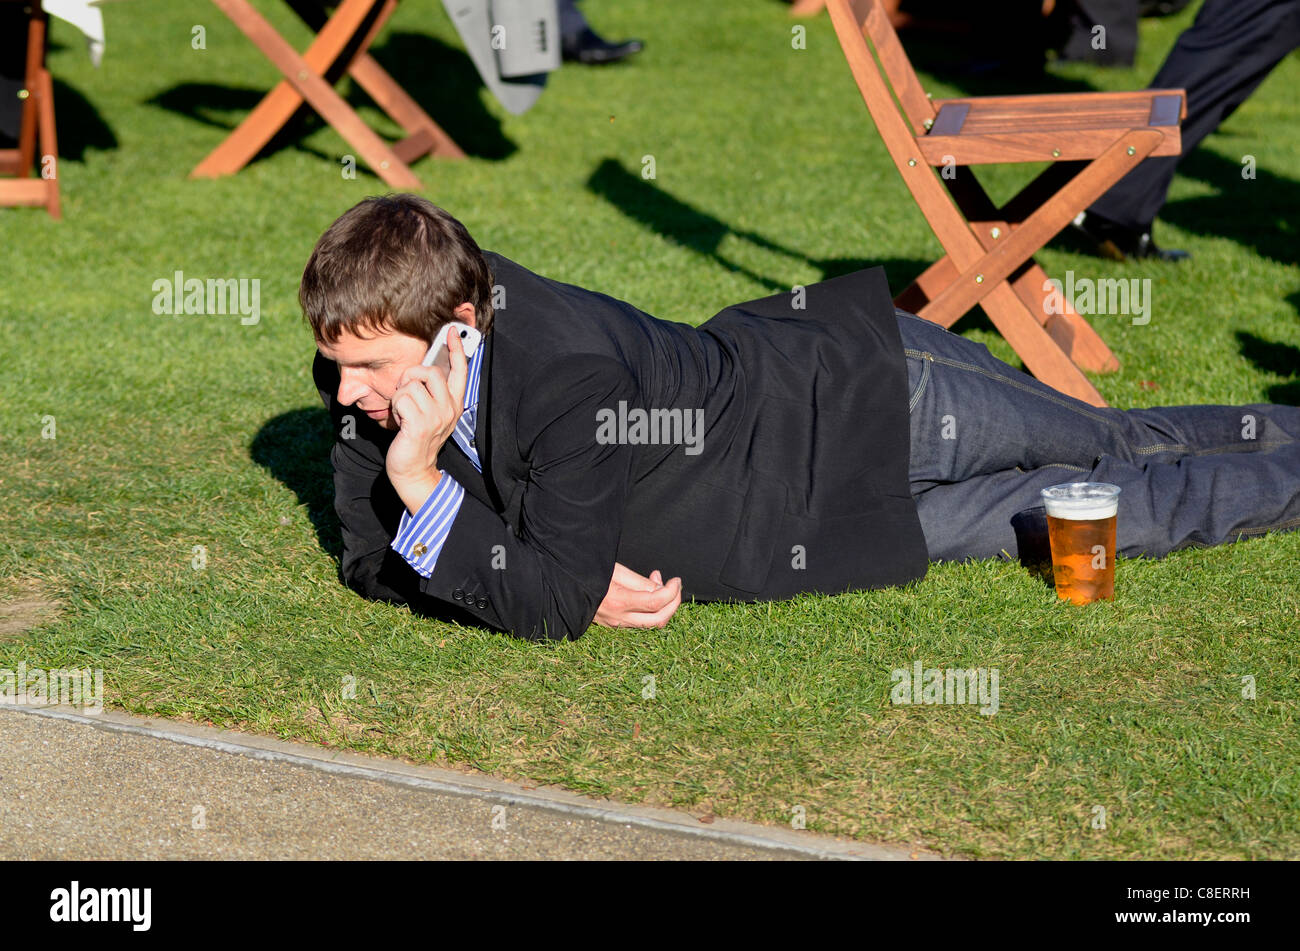 Man using mobile while lying on grass Ascot Races UK Stock Photo